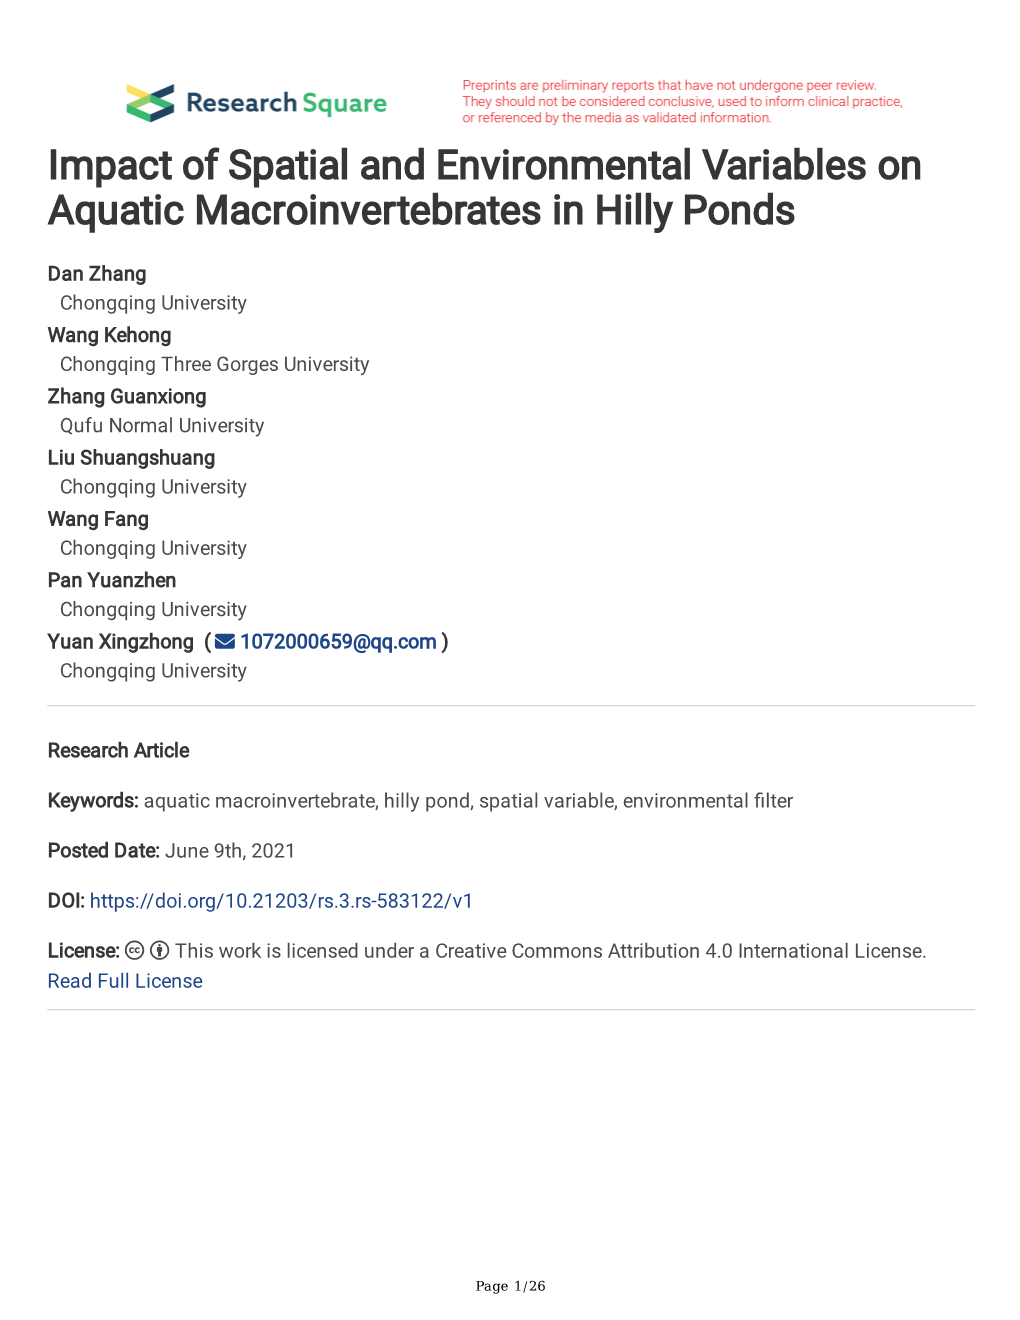 Impact of Spatial and Environmental Variables on Aquatic Macroinvertebrates in Hilly Ponds